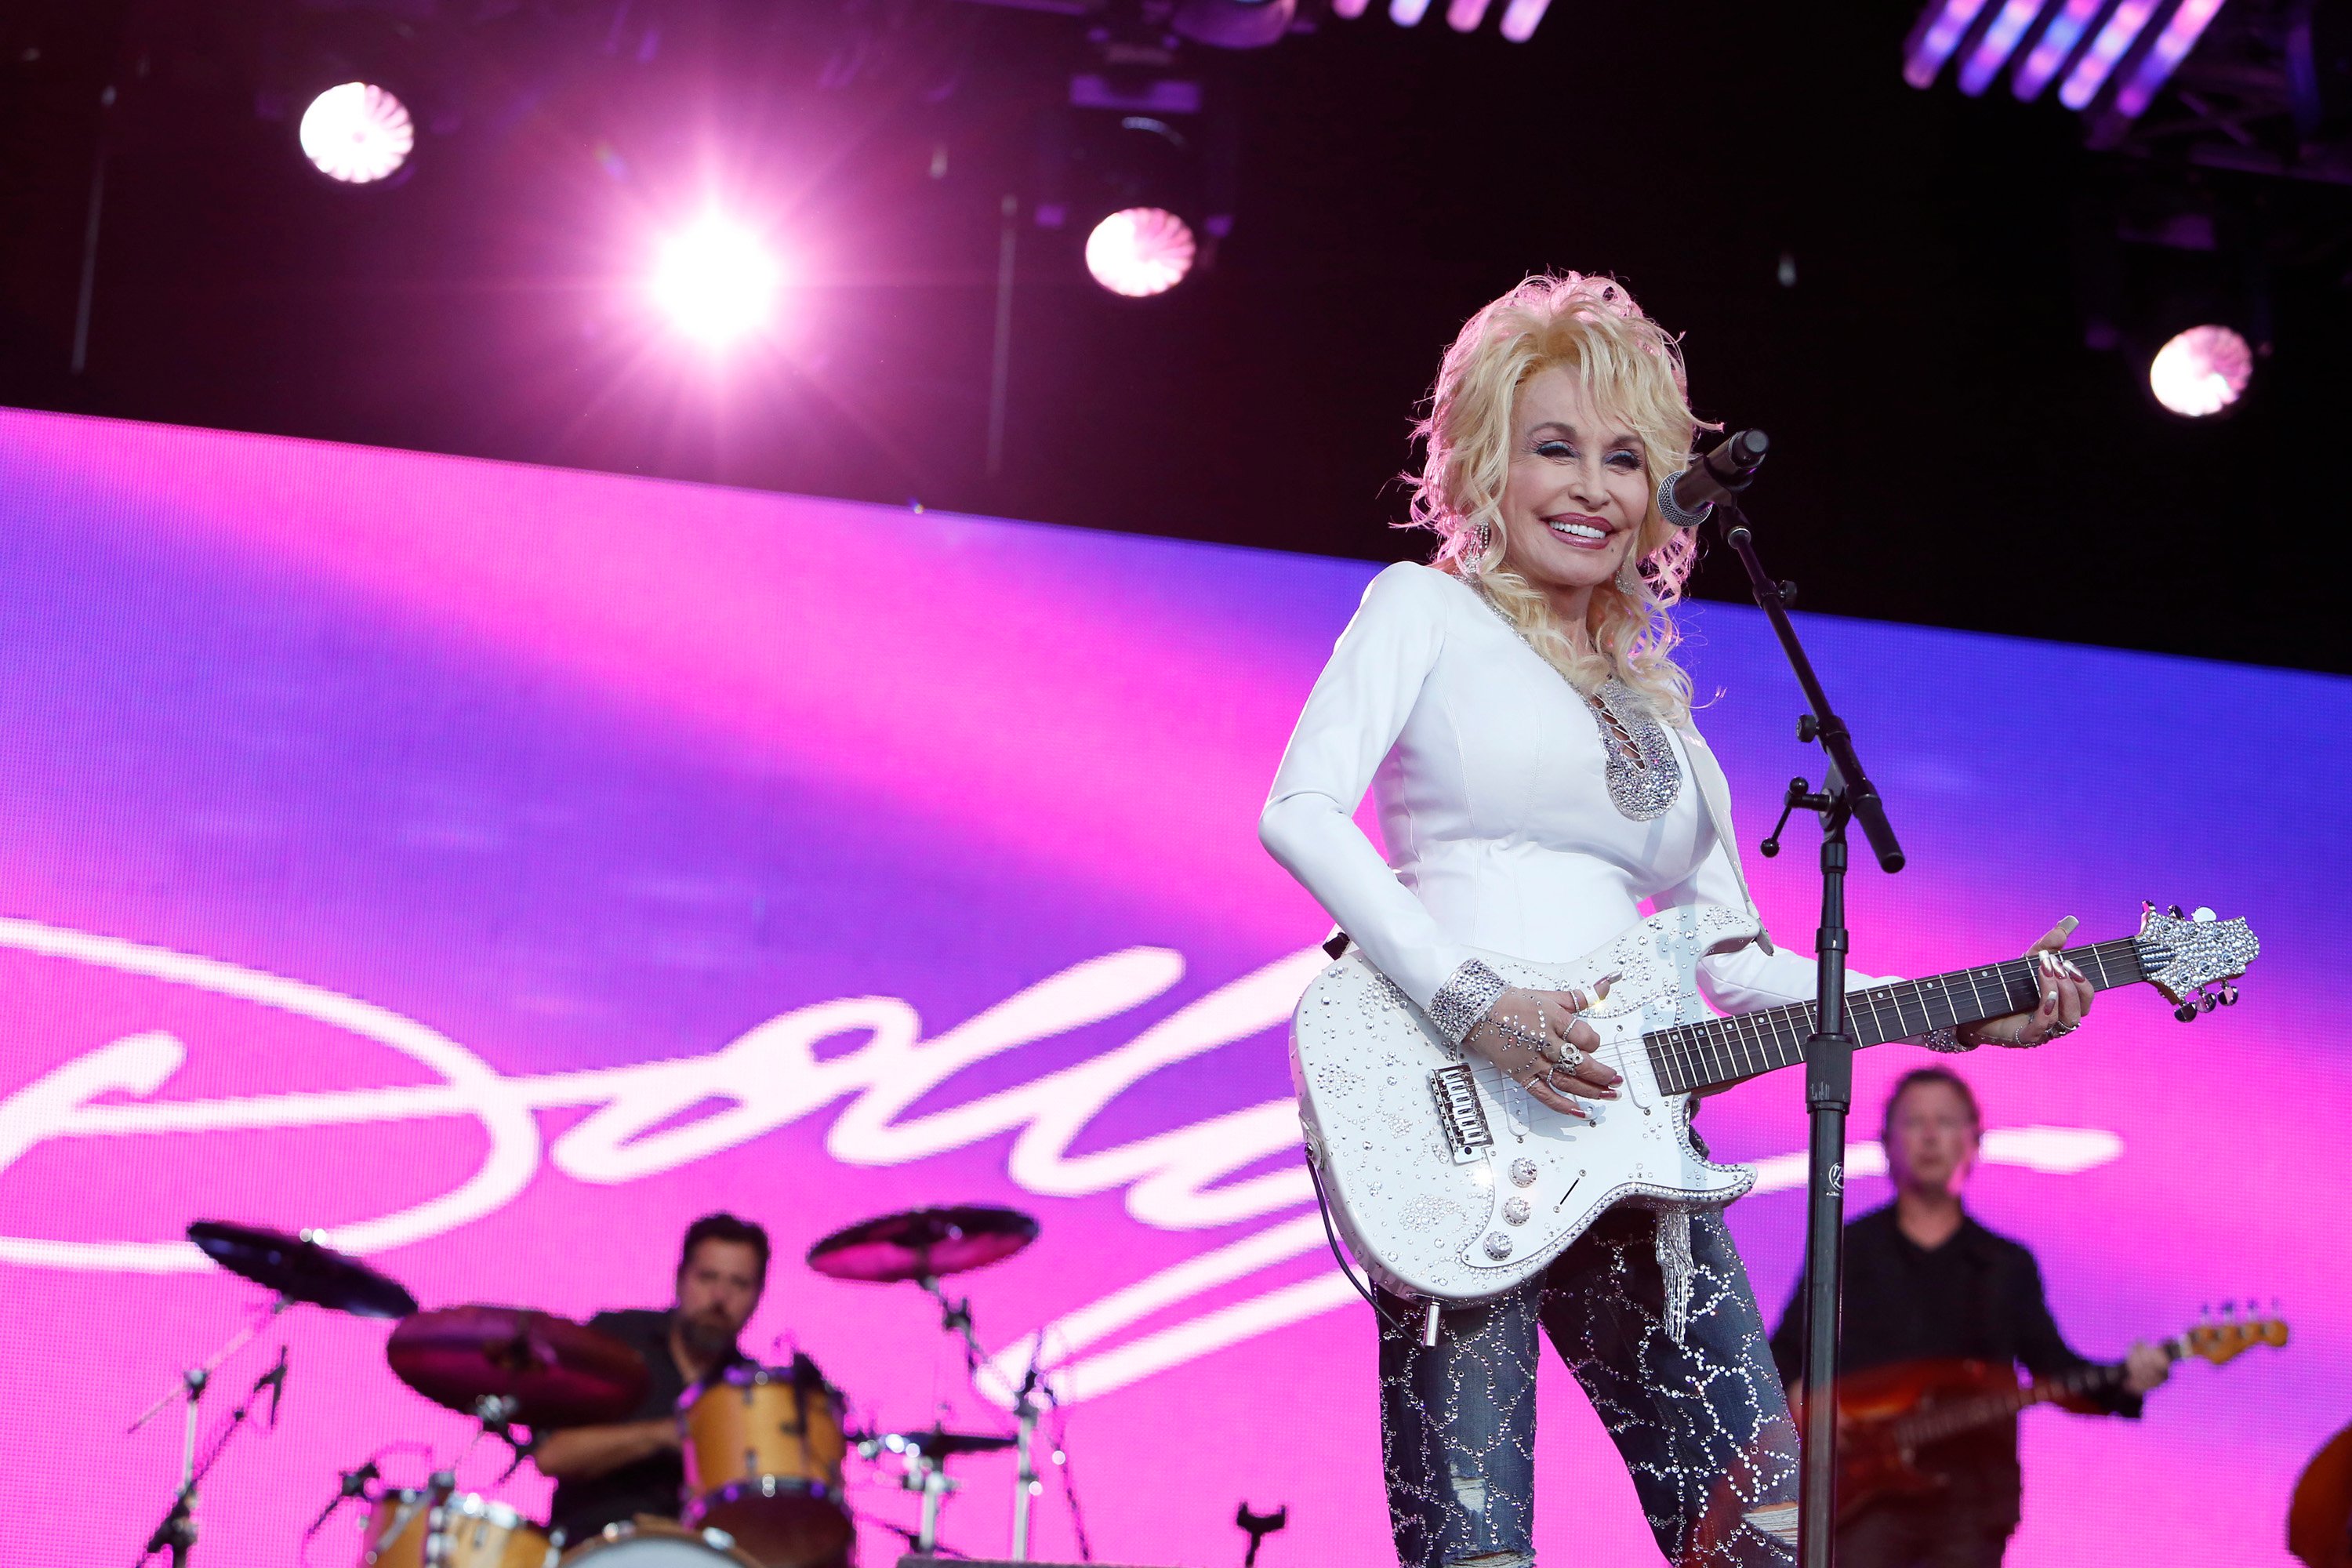 Dolly Parton performing on the 'Jimmy Kimmel Live' stage. She's wearing a white top and playing a white guitar.